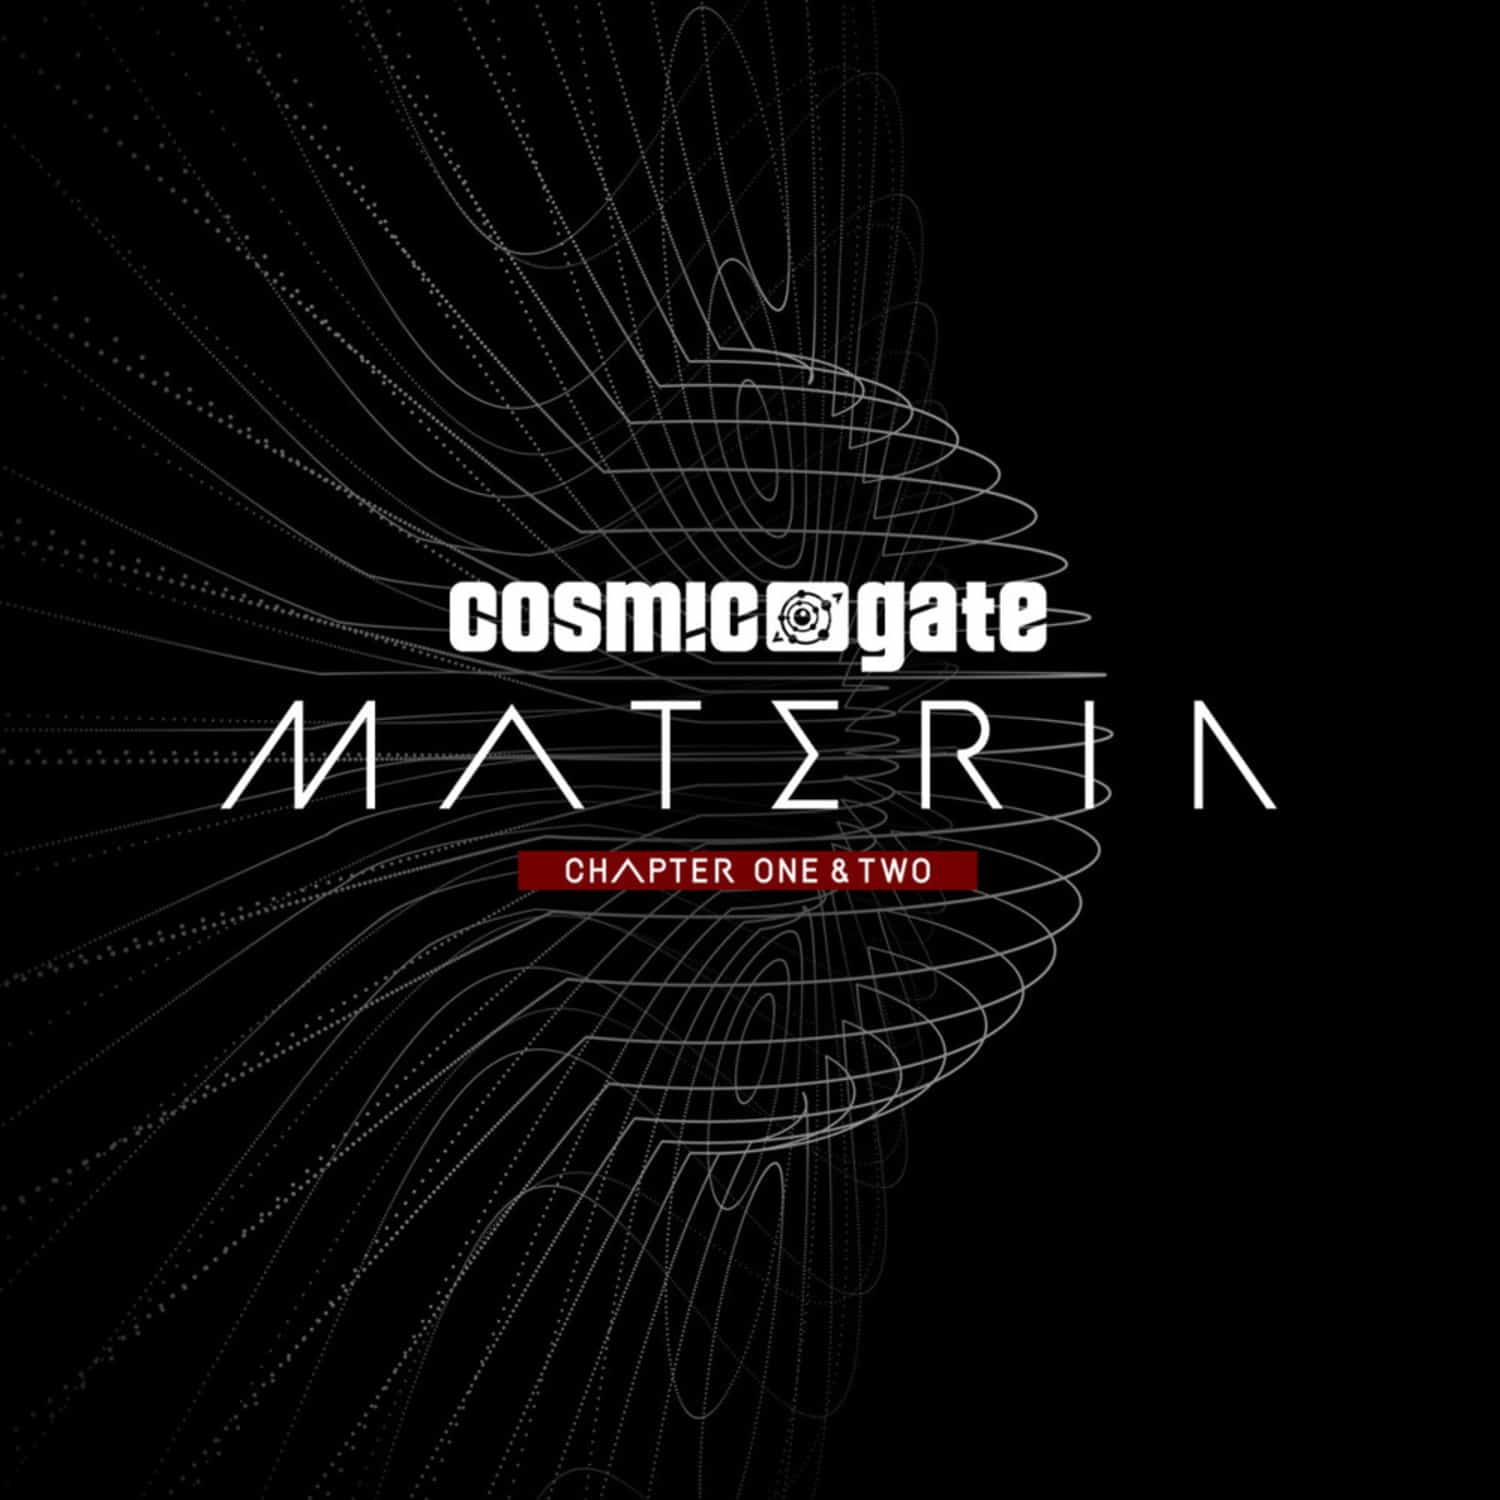 Cosmic Gate - MATERIA - CHAPTER ONE & TWO 